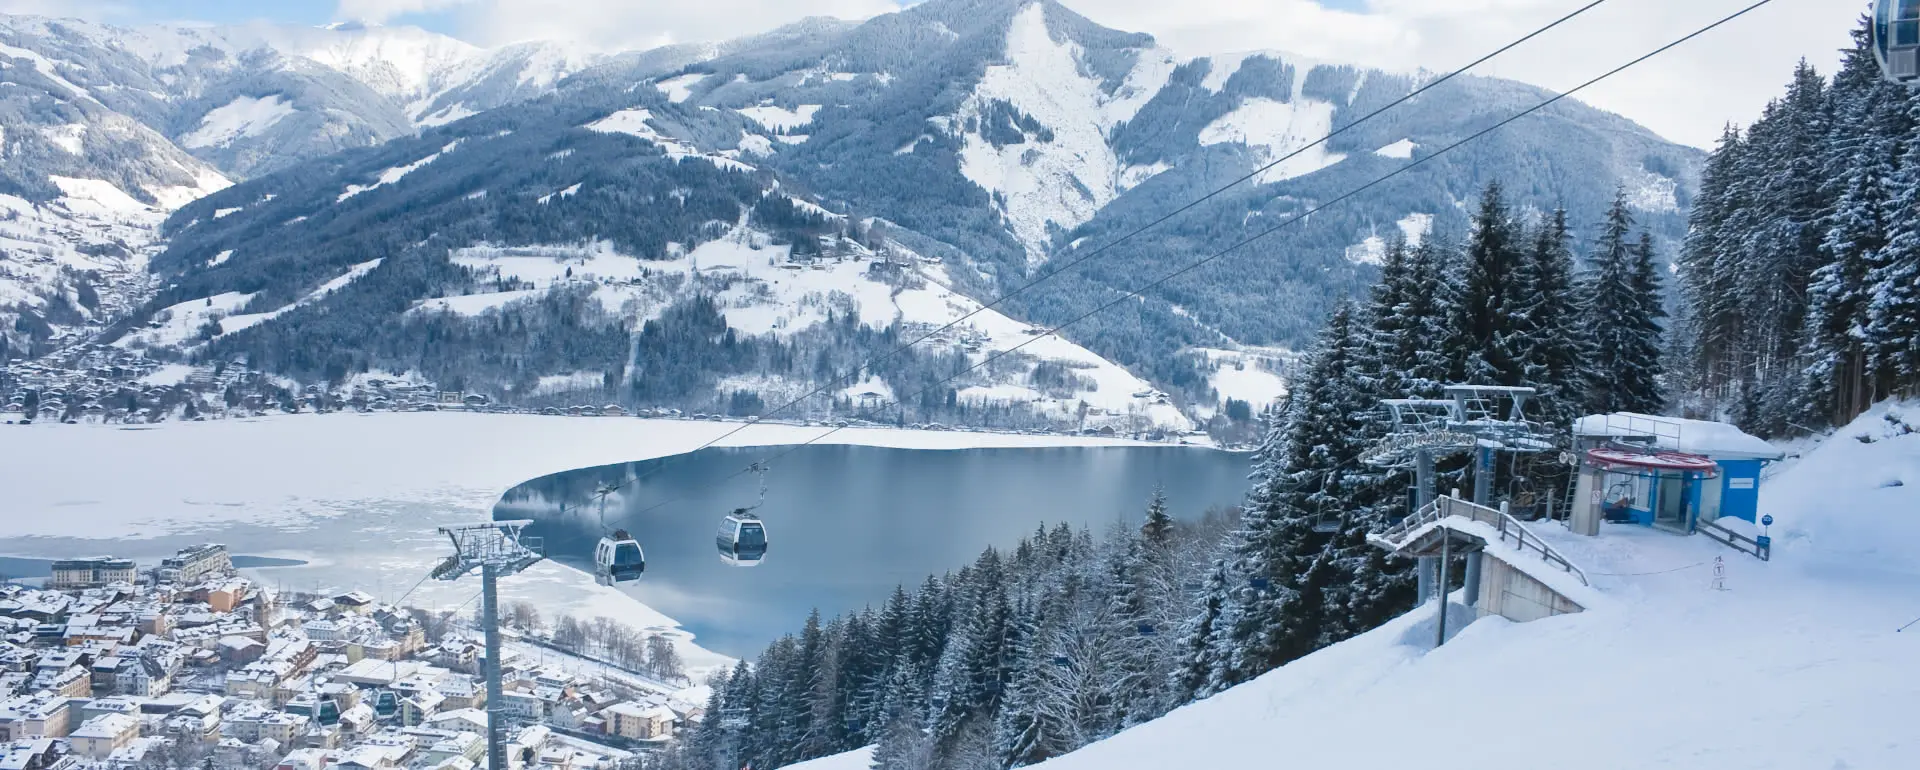 Zell am See - the destination for exhibition hotels